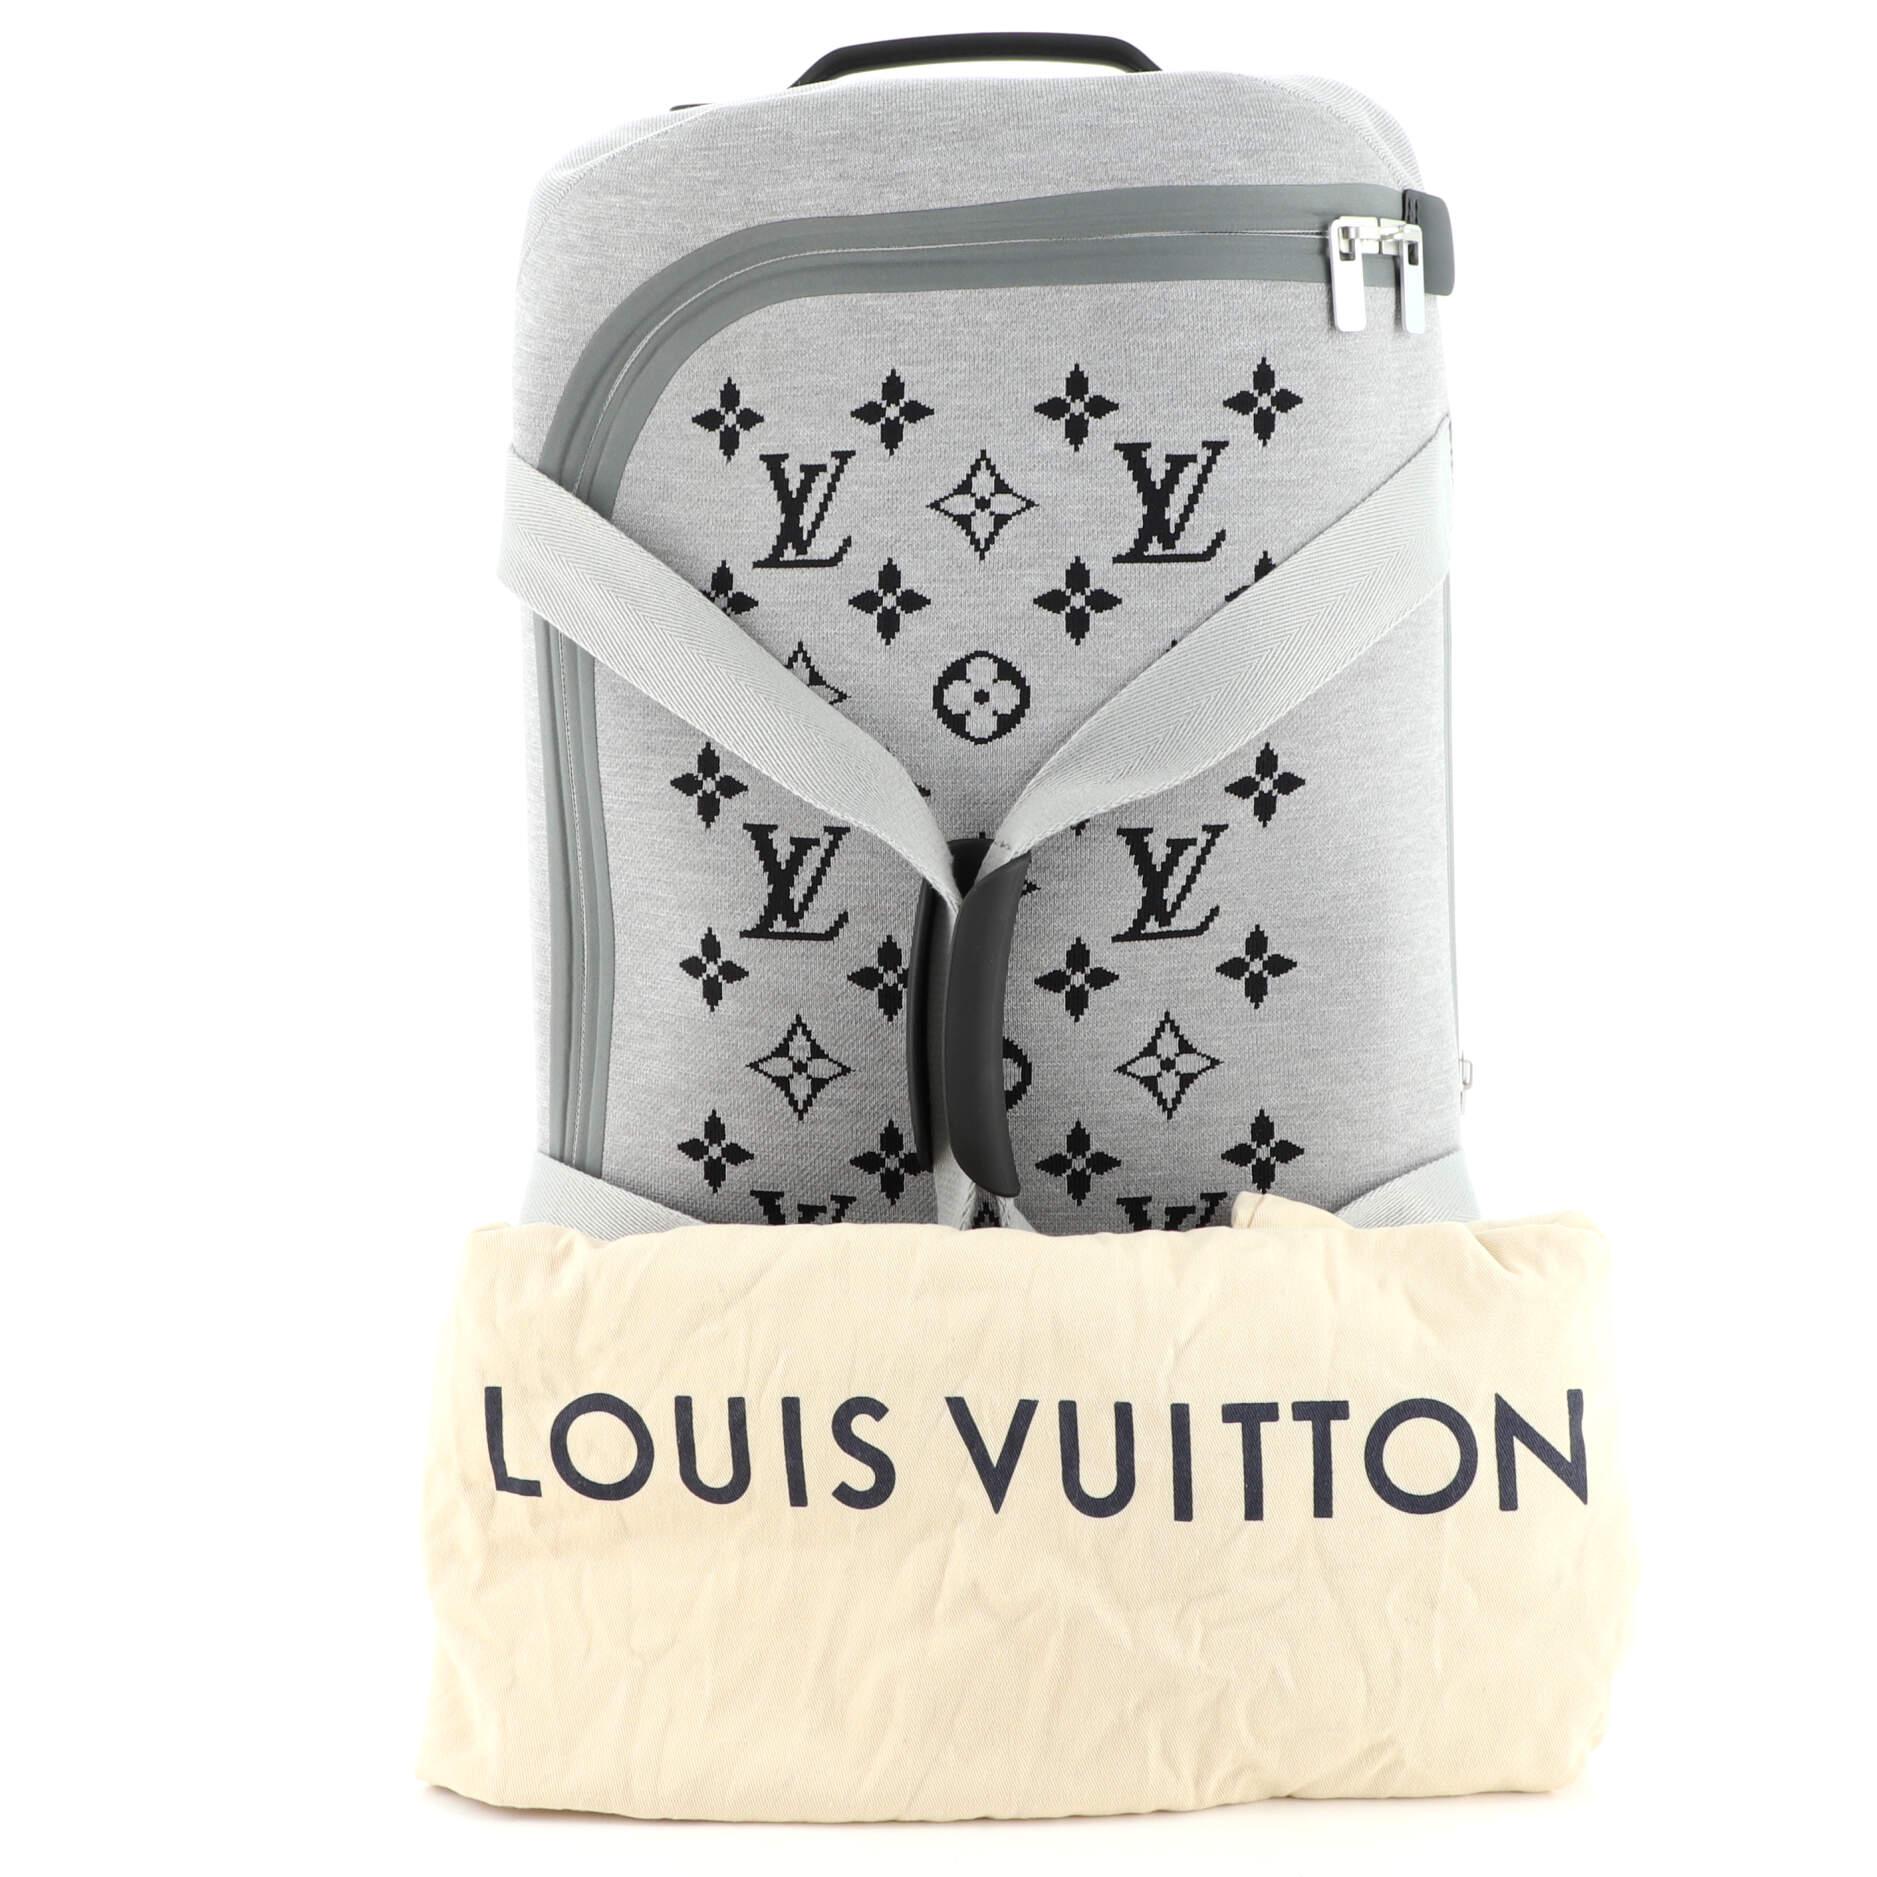 Louis Vuitton Horizon Carry On - For Sale on 1stDibs